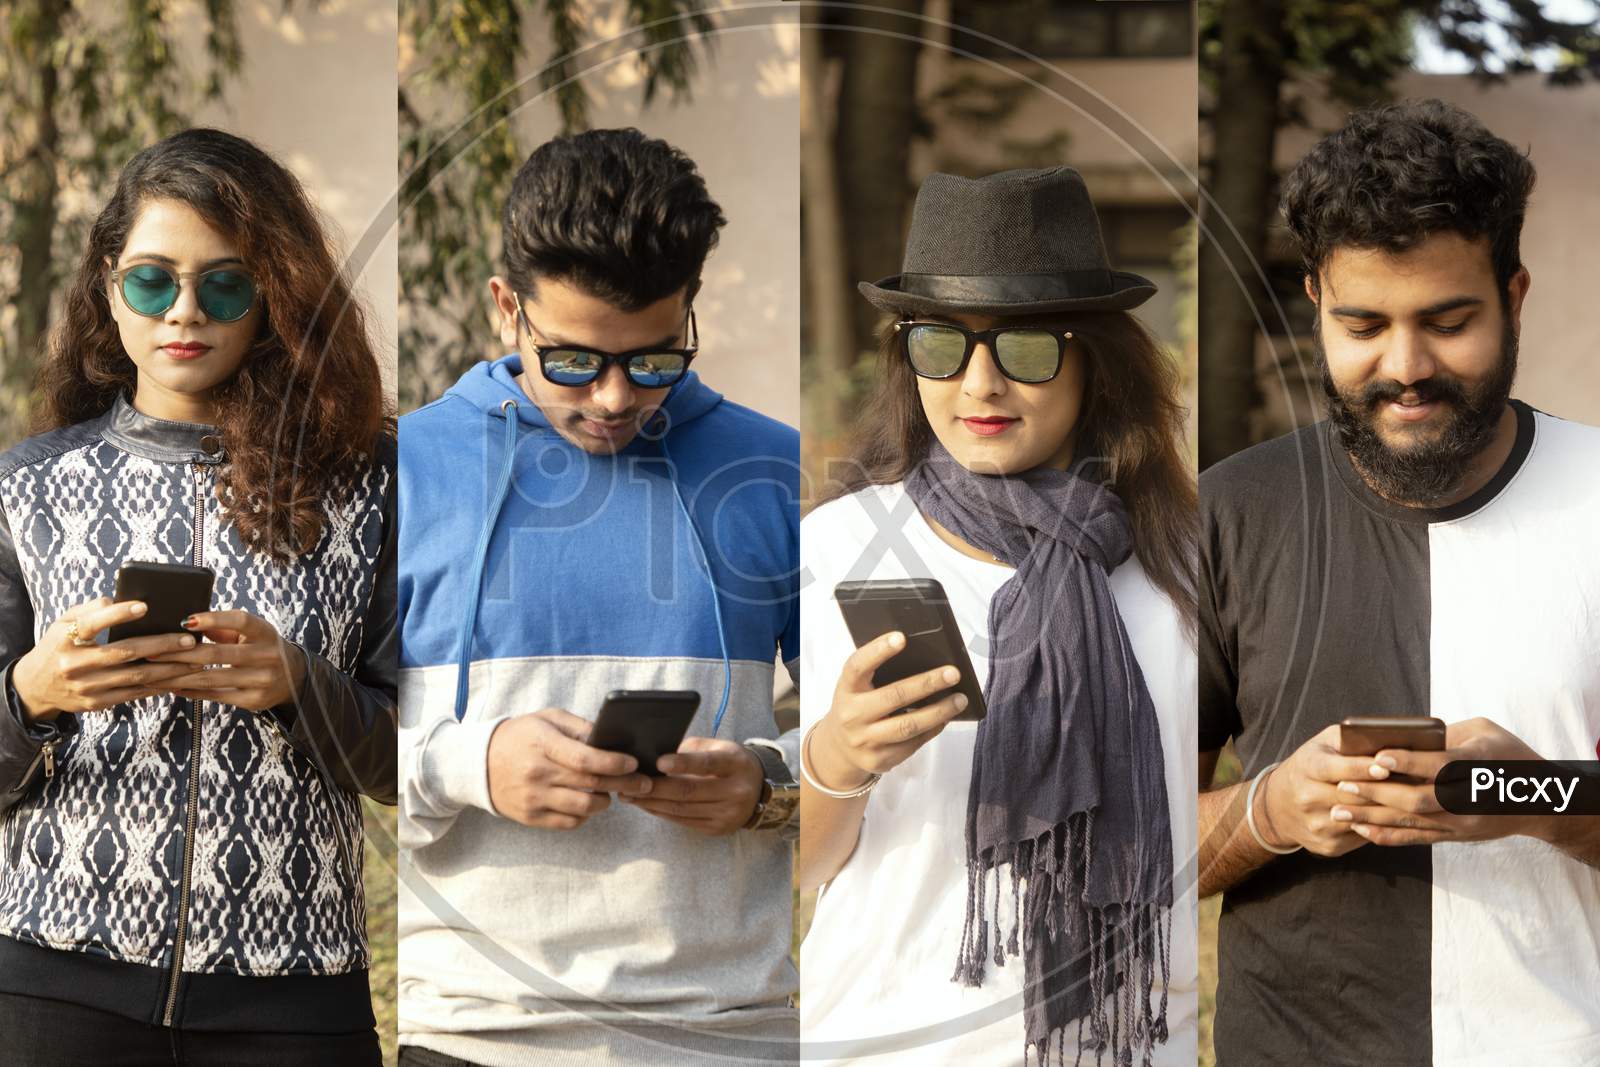 College Of People Busy On Mobile - Group Of Modern Trendy Millennials Using Smartphone - Concept Of Social Media, Internet, E Commerce, Technology Usage